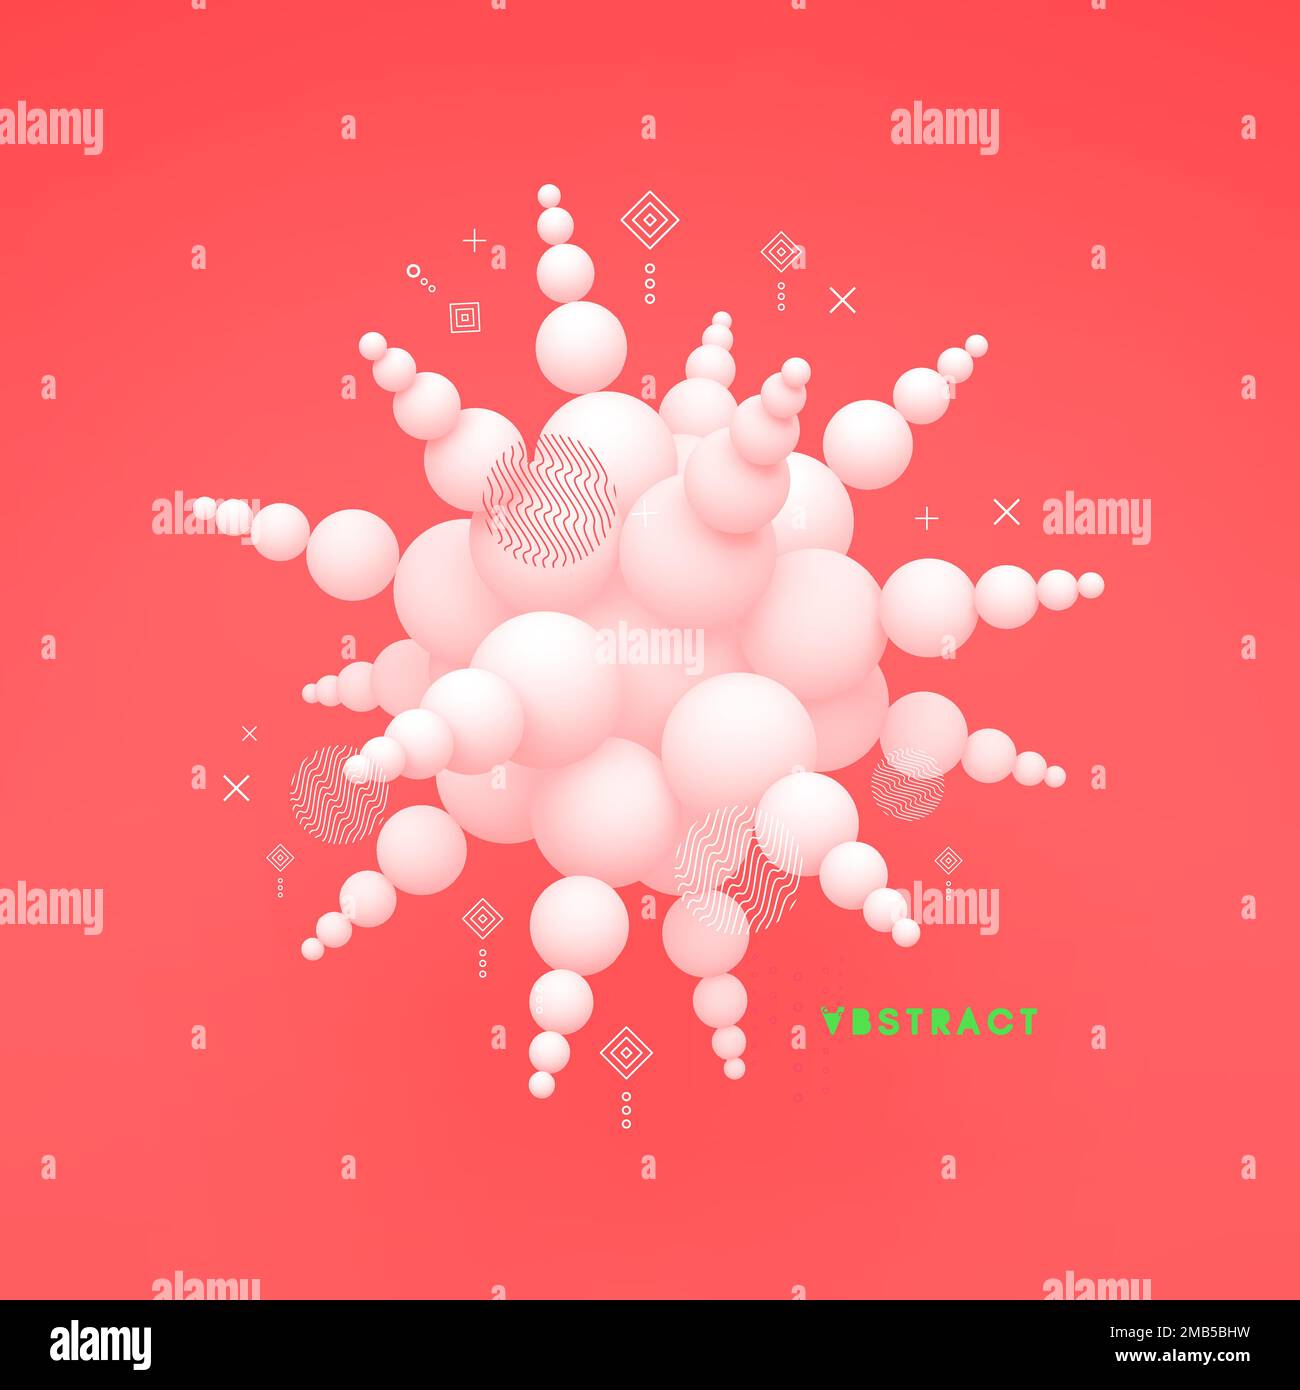 3d abstract spheres composition. Vector illustration. Stock Vector